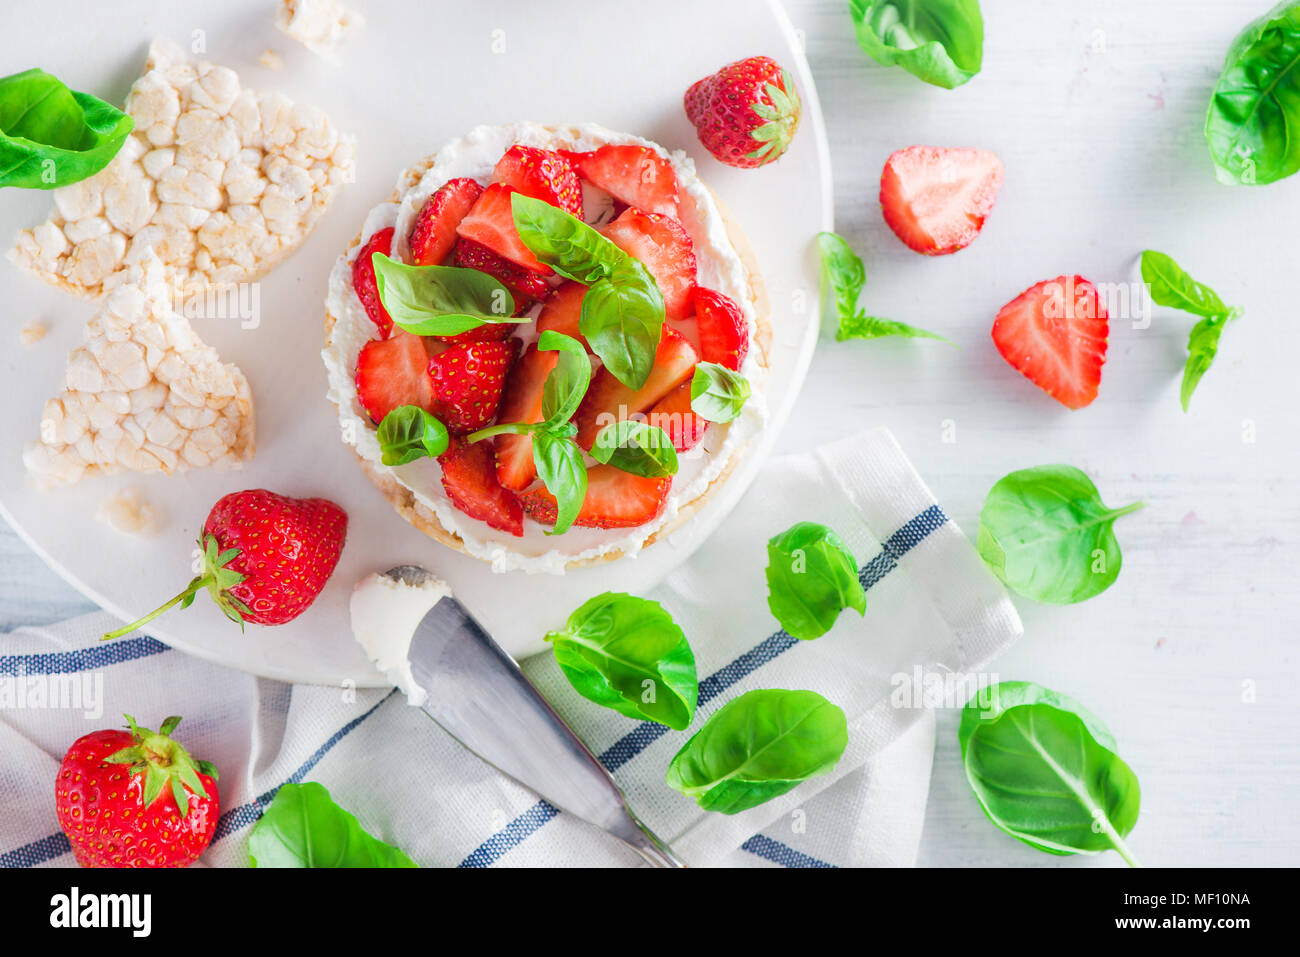 Healthy snack with crisp bread, fresh strawberries, goat cheese, and basil leaves. Easy appetizer recipe. Stock Photo